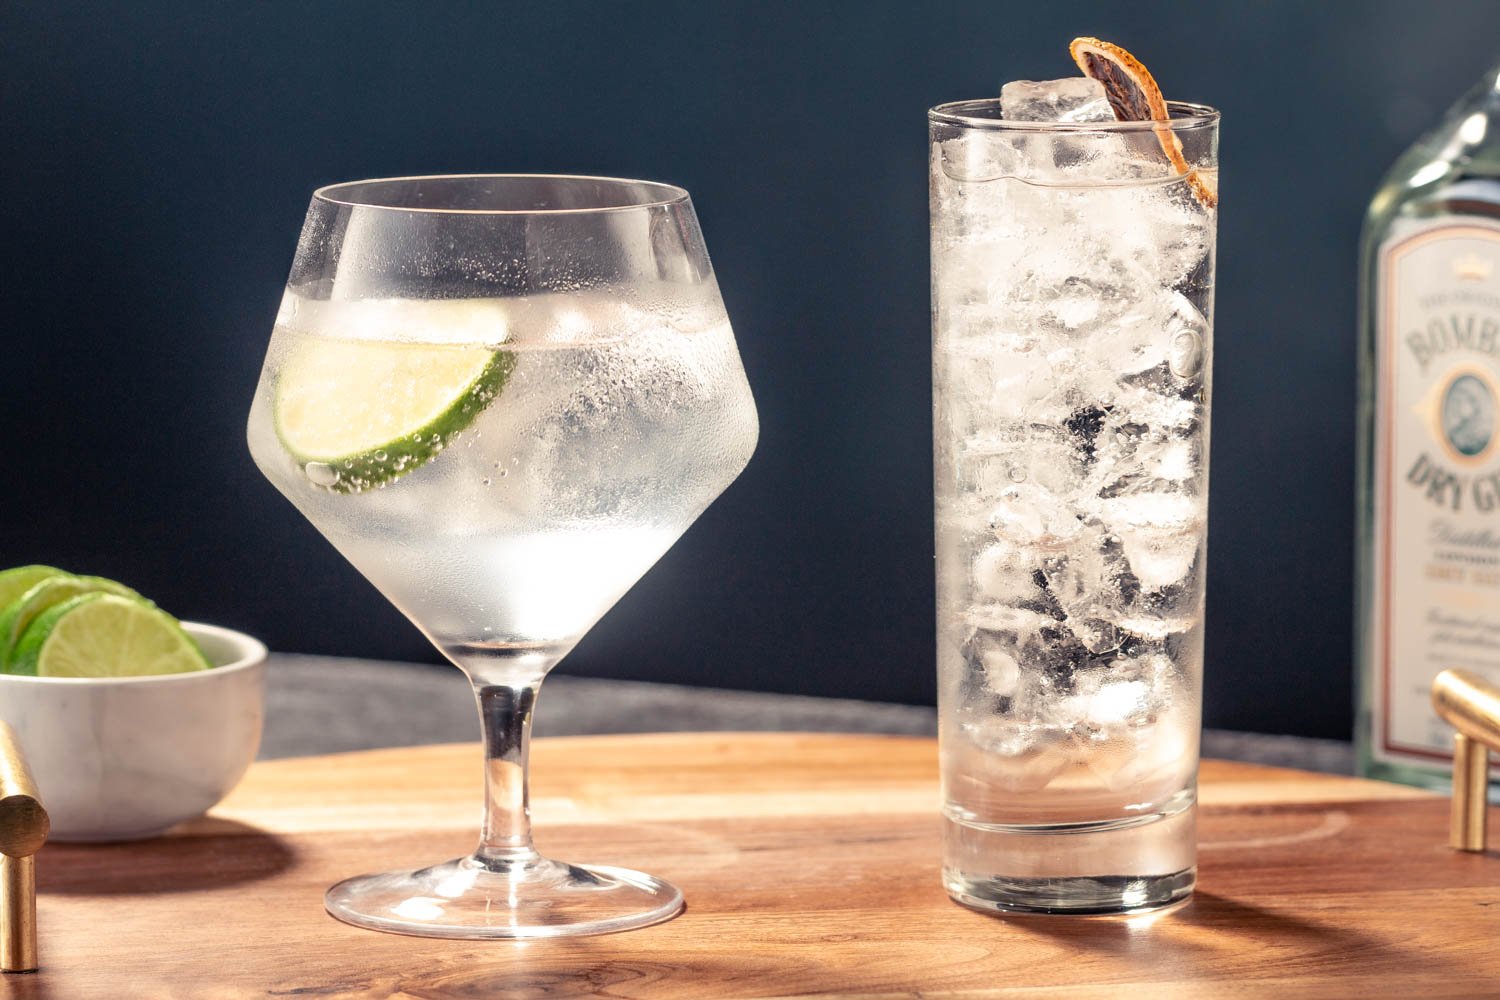 Gin & Tonic - How To Make A Gin And Tonic